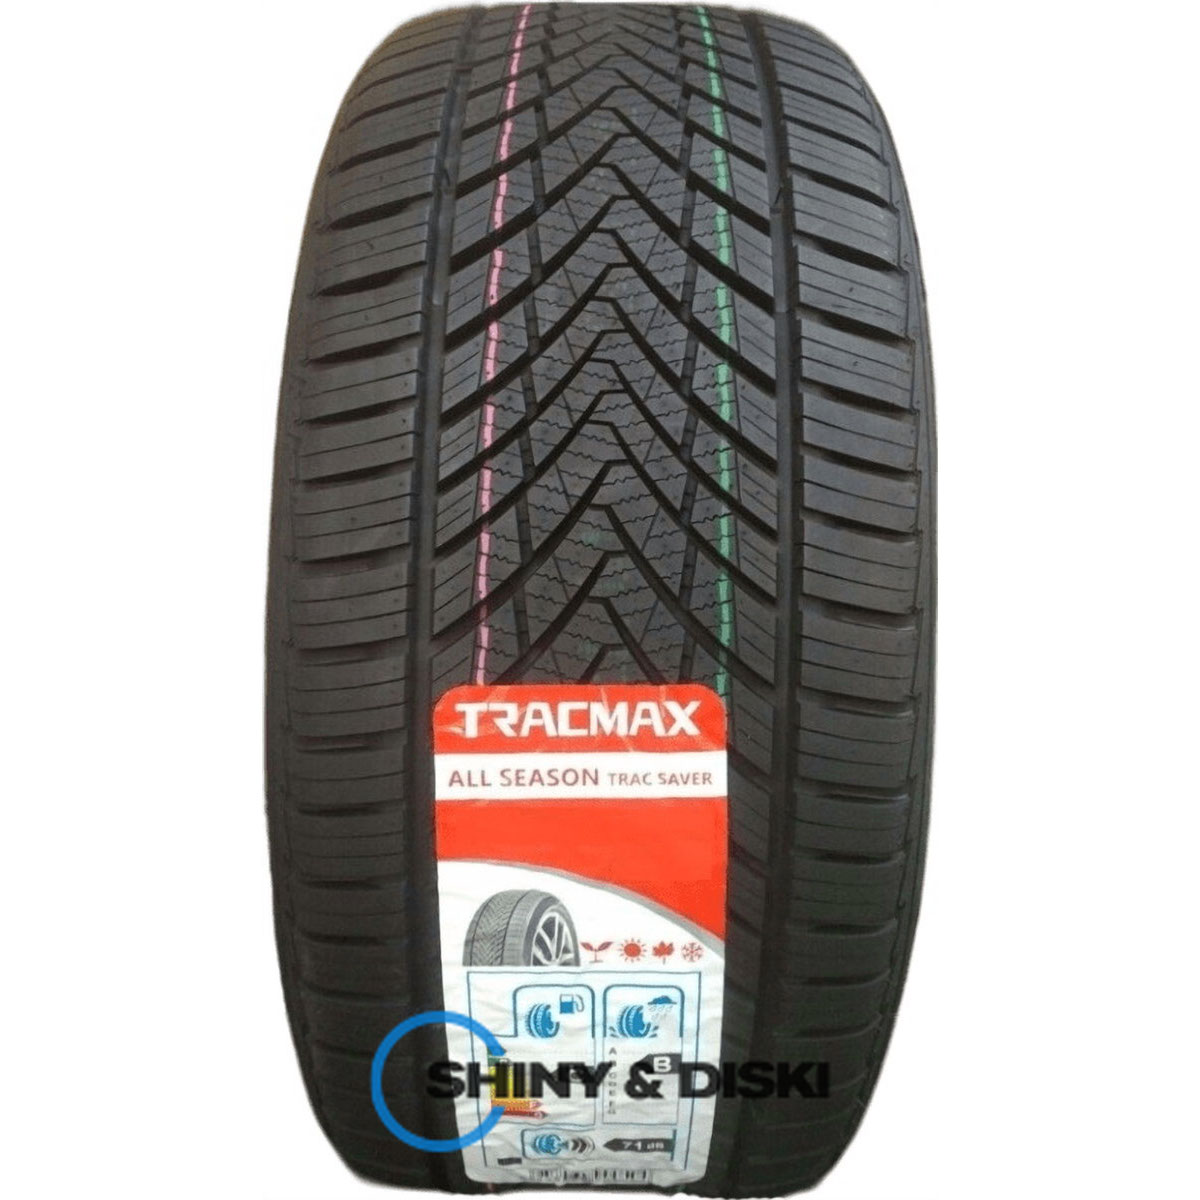 покрышки tracmax a/s trac saver 185/70 r14 88t